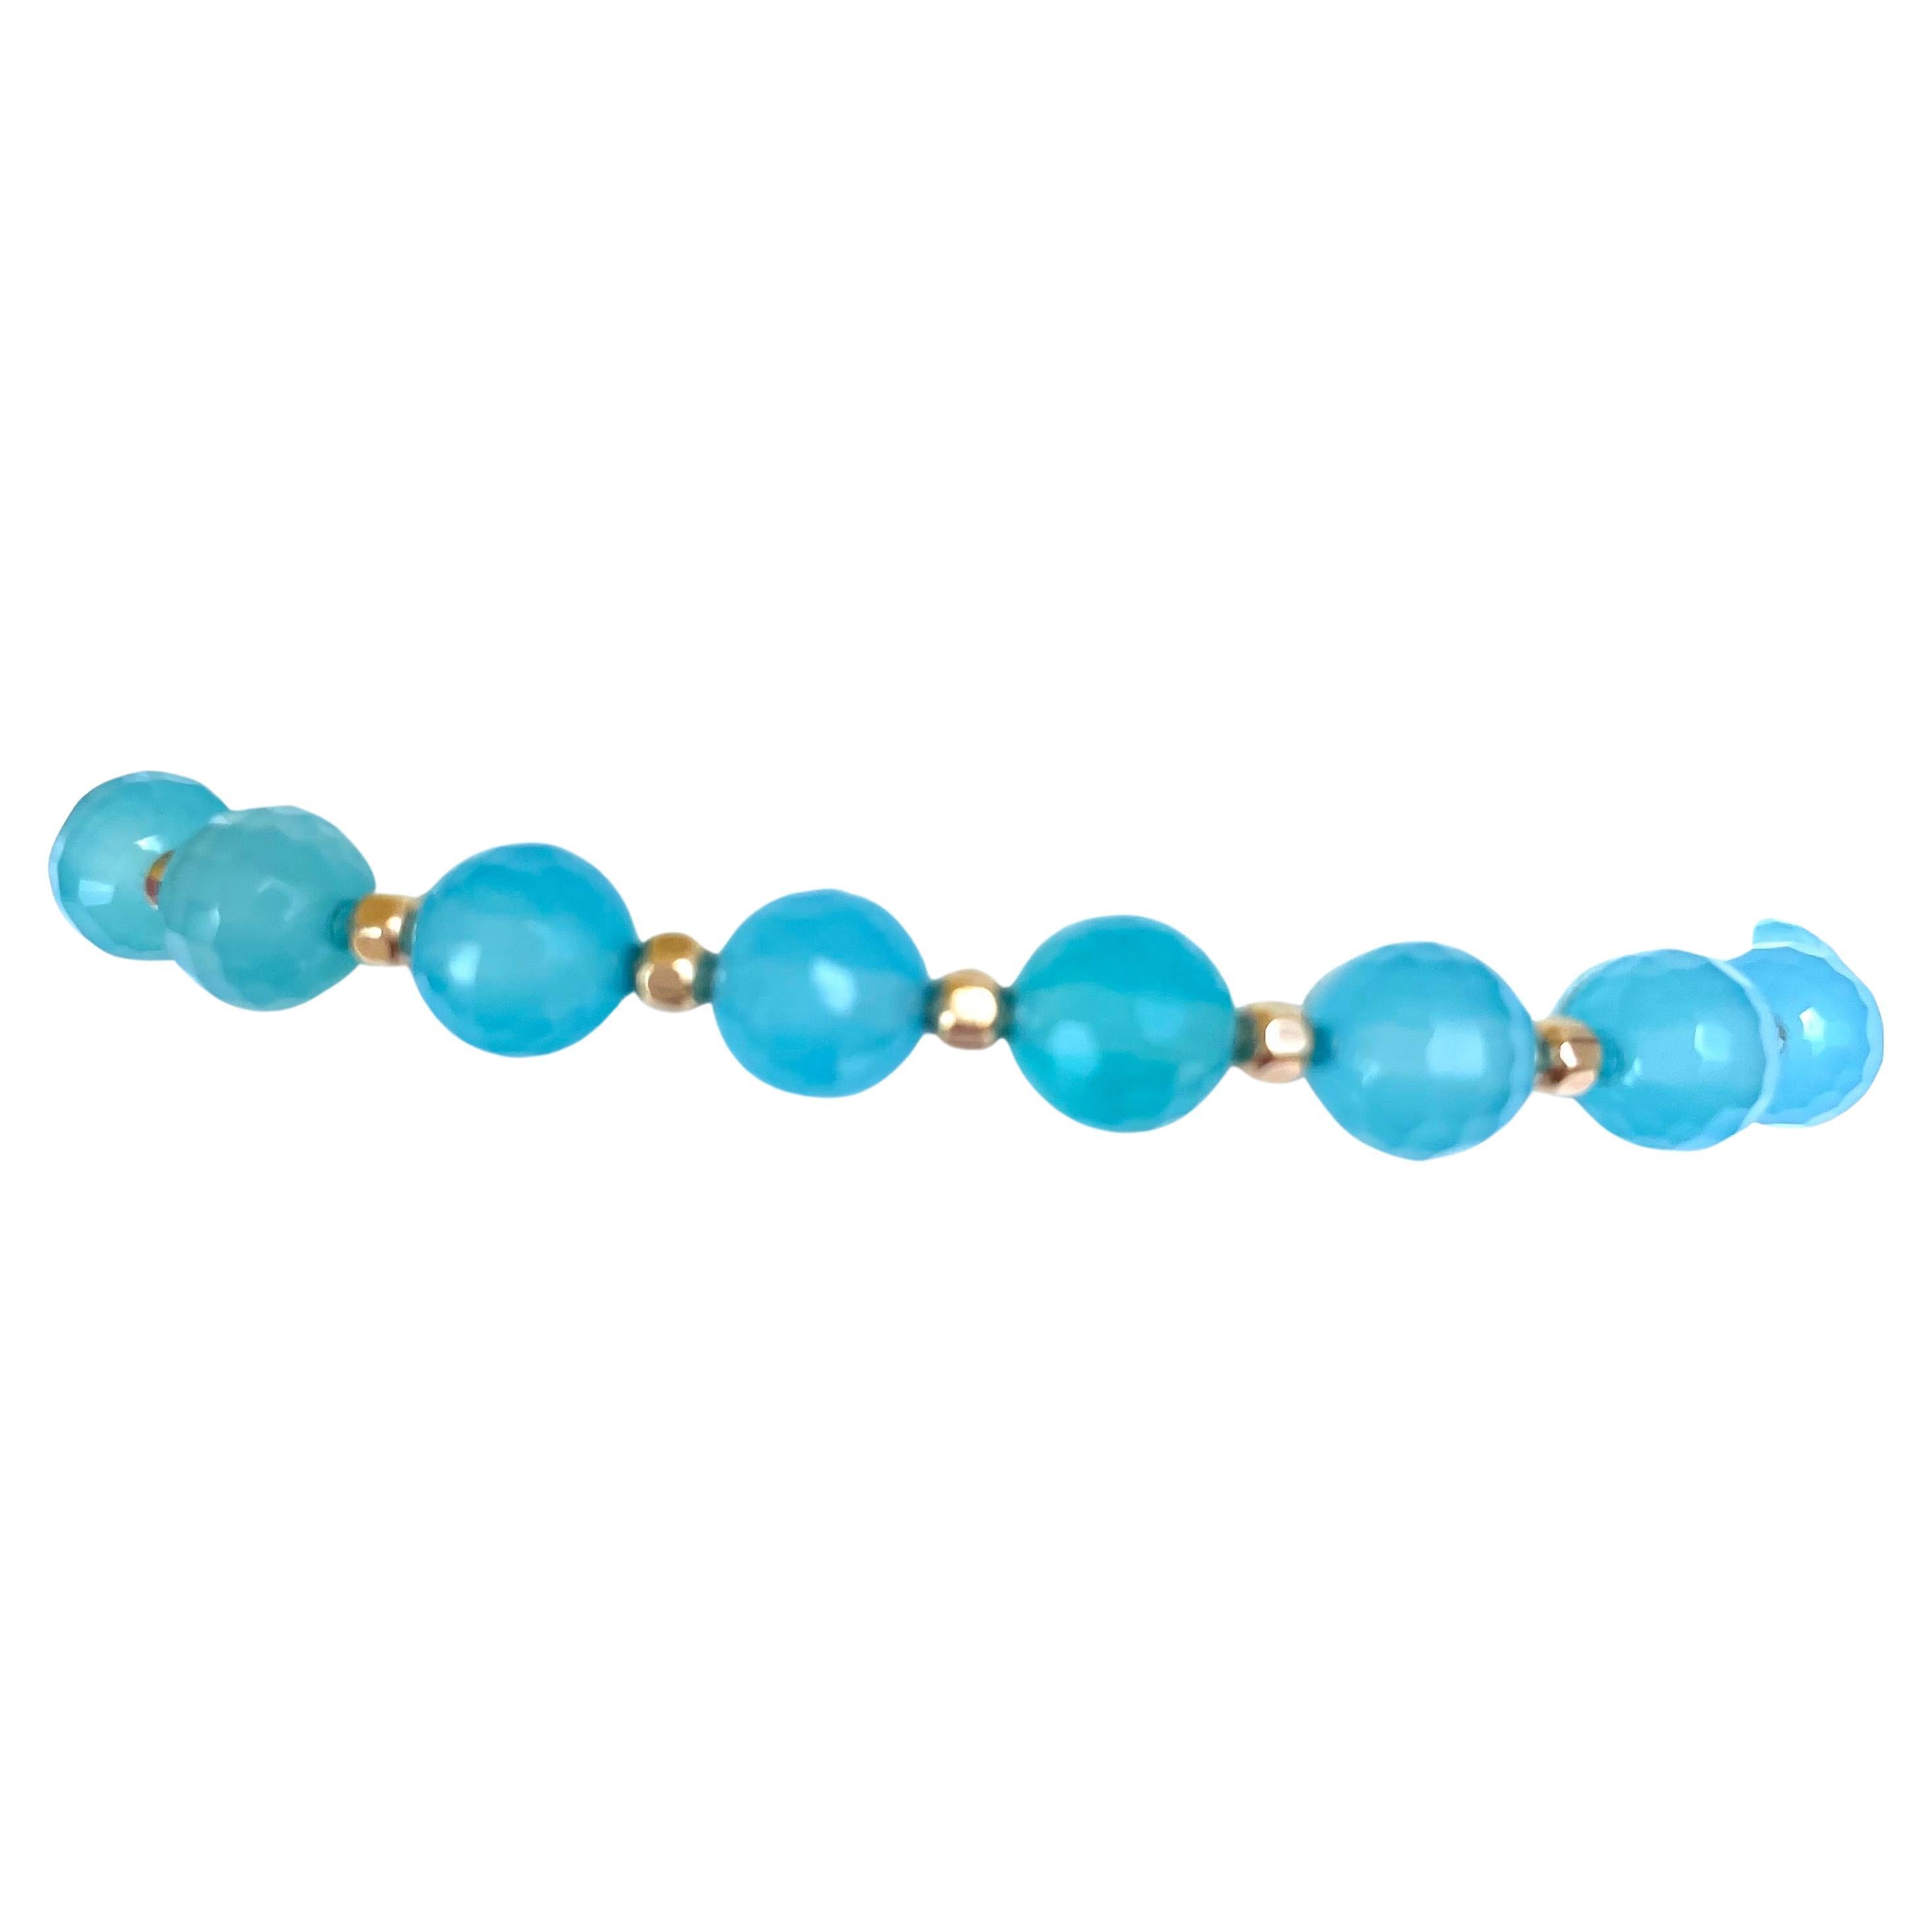 
Description
Sea Blue Chalcedony quartz with gold filled faceted balls stretchy bracelet.
Item # B1329

Materials and Weight
Chalcedony quartz 54 carats, 8mm, round beads.
Gold filled 3mm faceted balls, round. 16 pieces.

Dimensions
Size 7